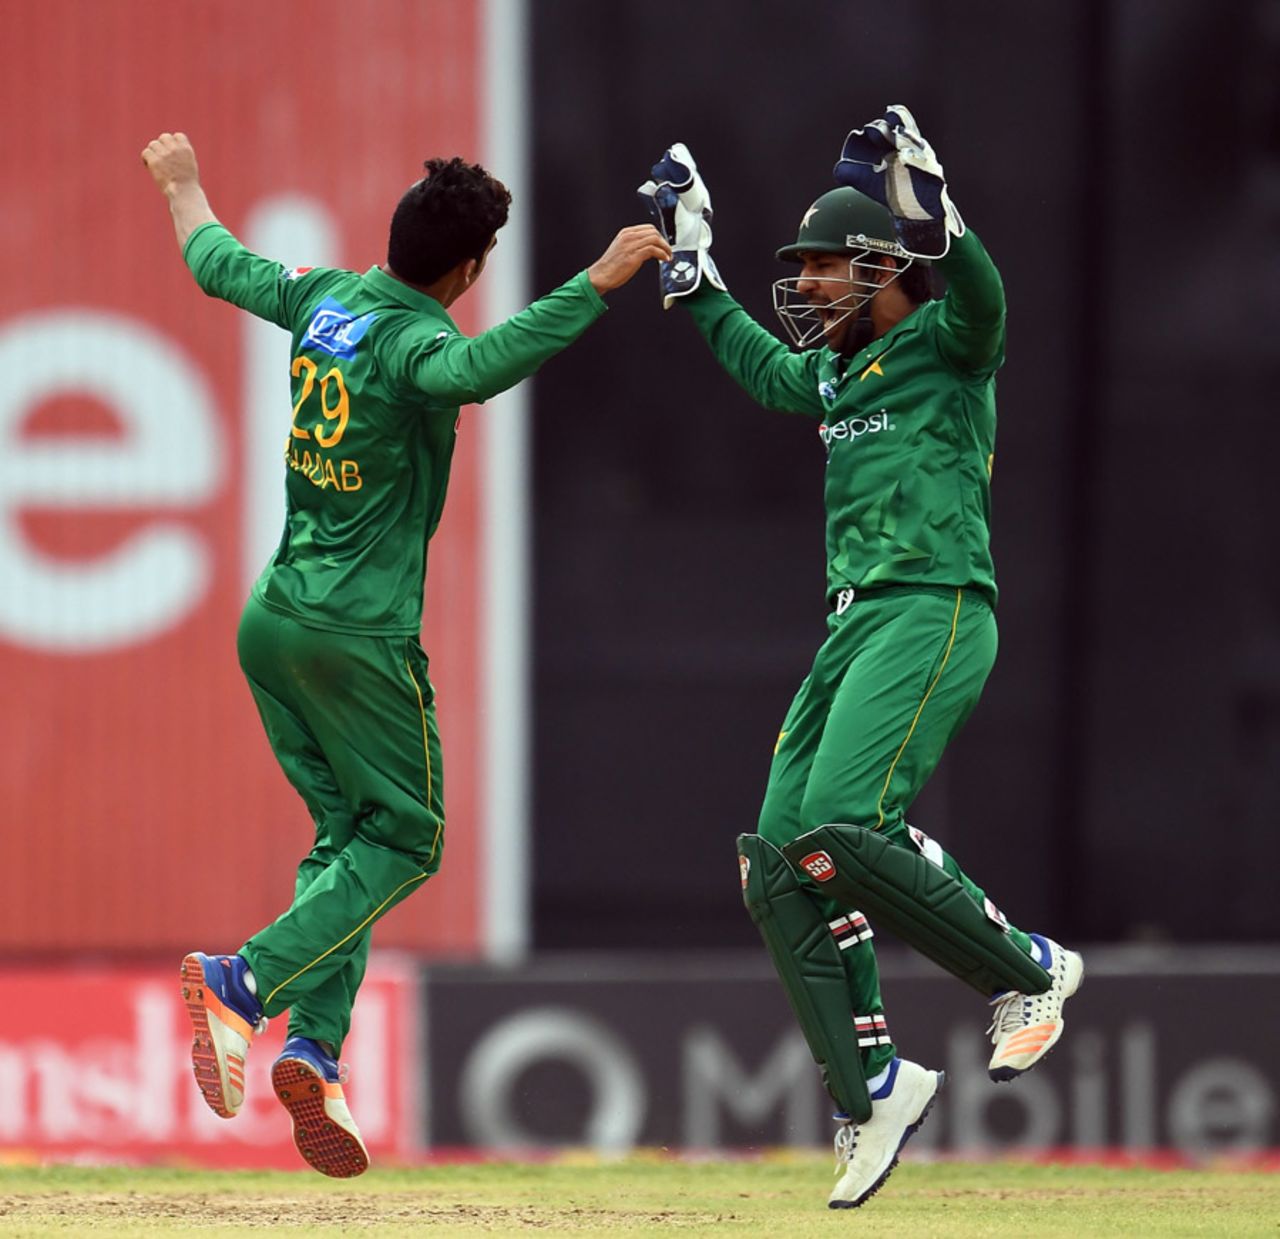 Shadab Khan and Sarfraz Ahmed do a jig after Rovman Powell fell for a duck, West Indies v Pakistan, 2nd T20I, Port of Spain, March 30, 2017